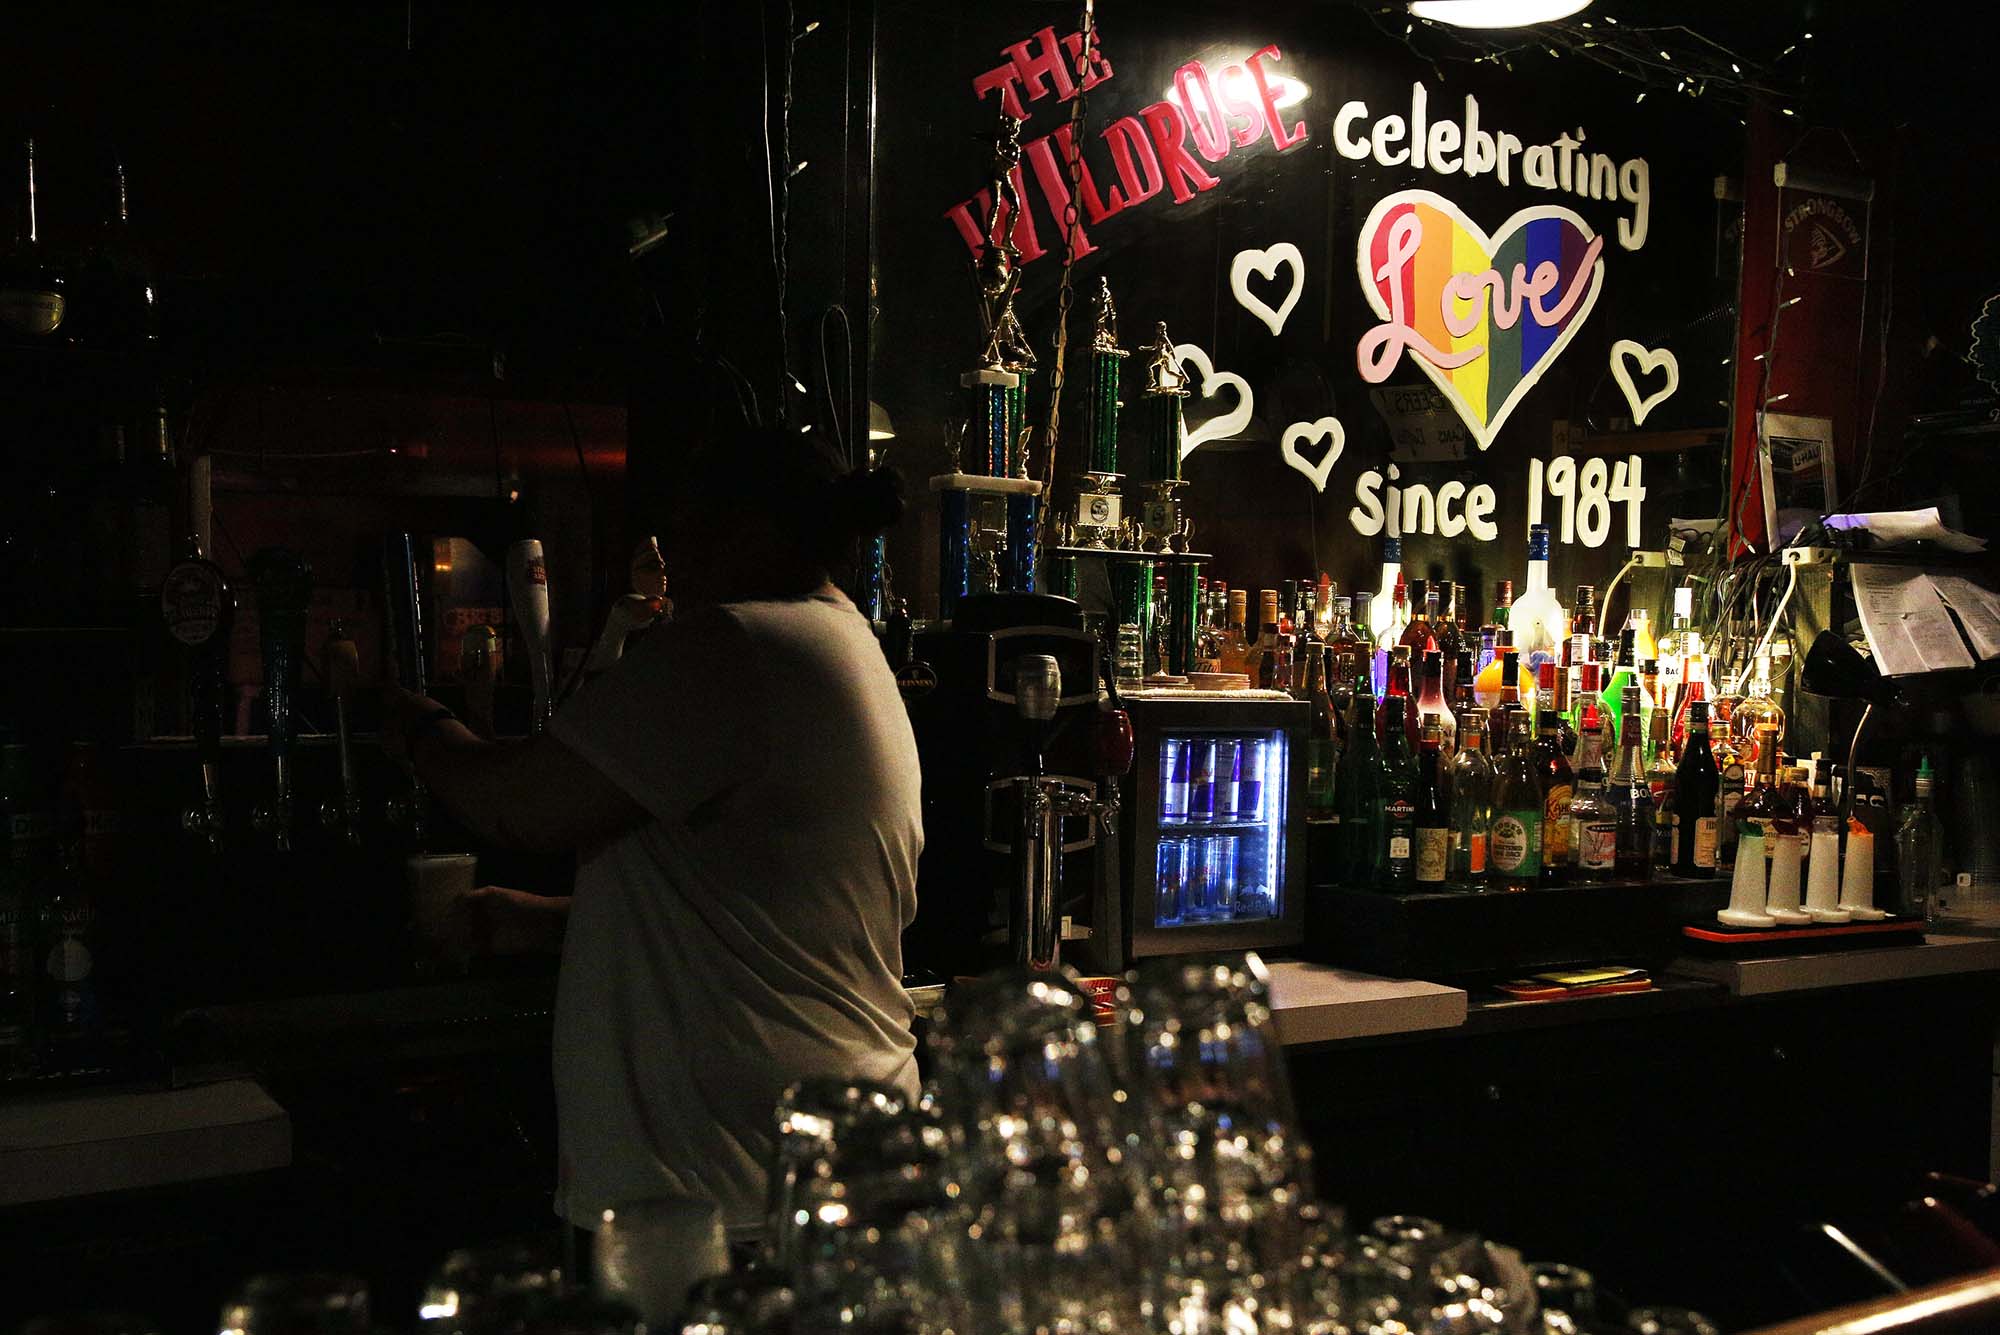 Where Are All the Lesbian Bars? The Brink Boston University pic